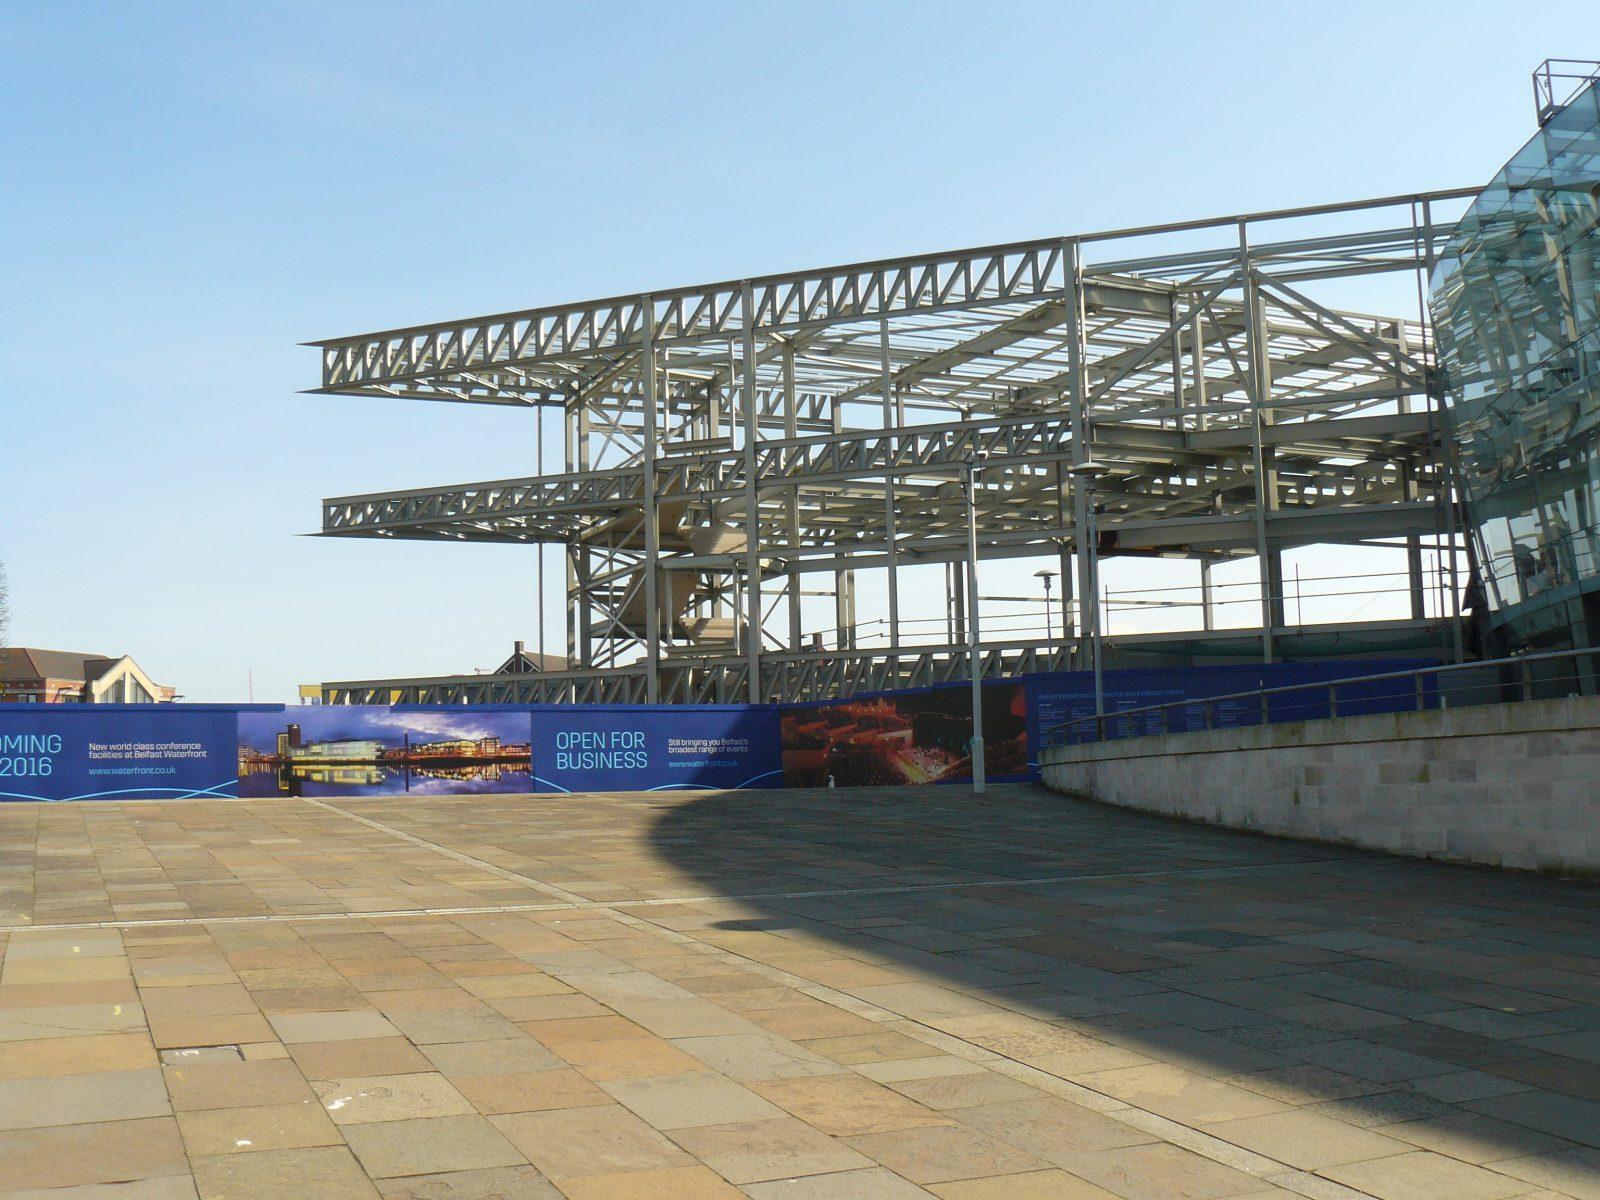 Steelframe in place from front